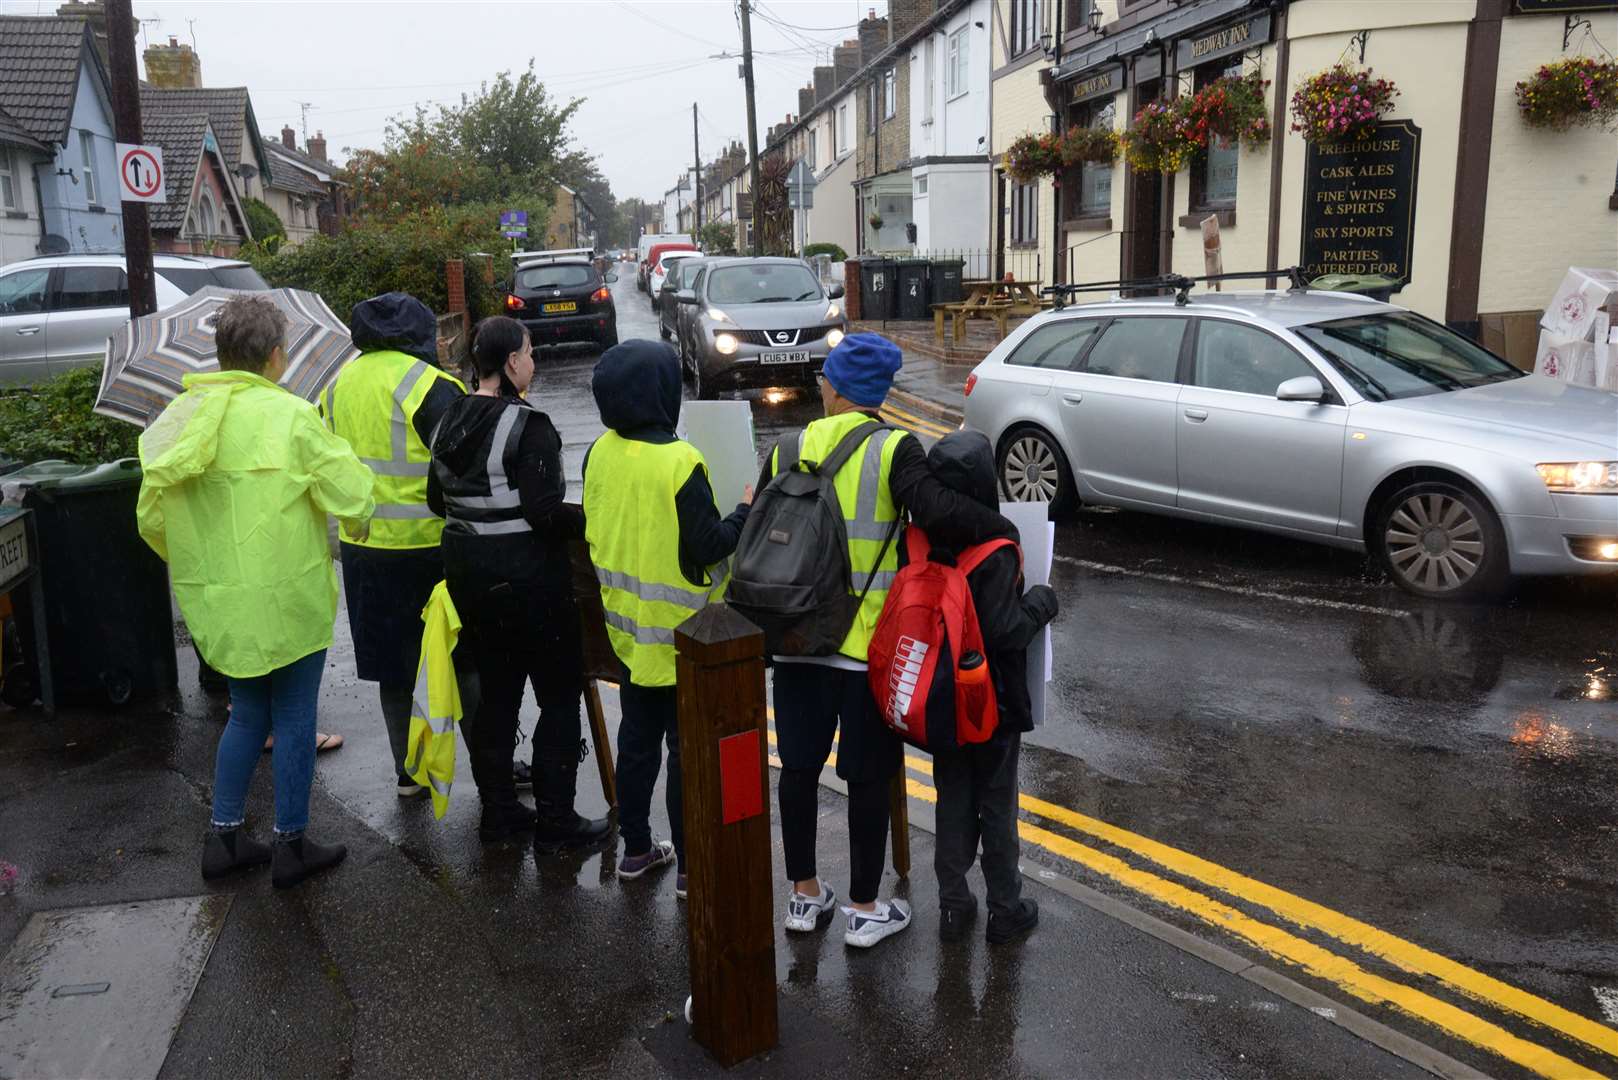 Residents line the street in Wouldham to protest against traffic on Wednesday morning. Picture: Chris Davey. (16109661)